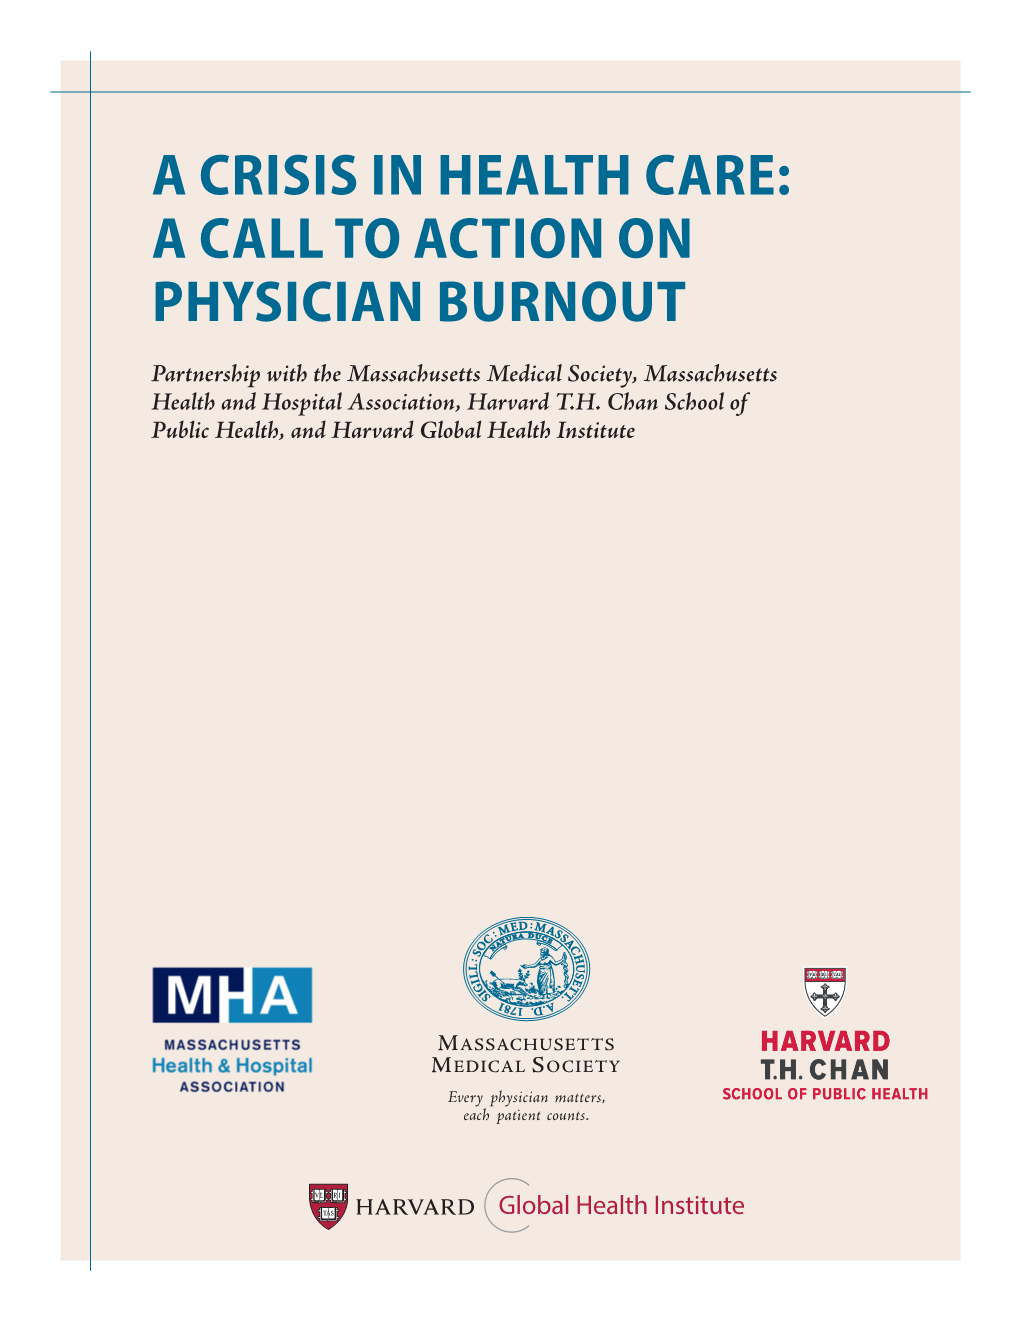 A Call to Action on Physician Burnout